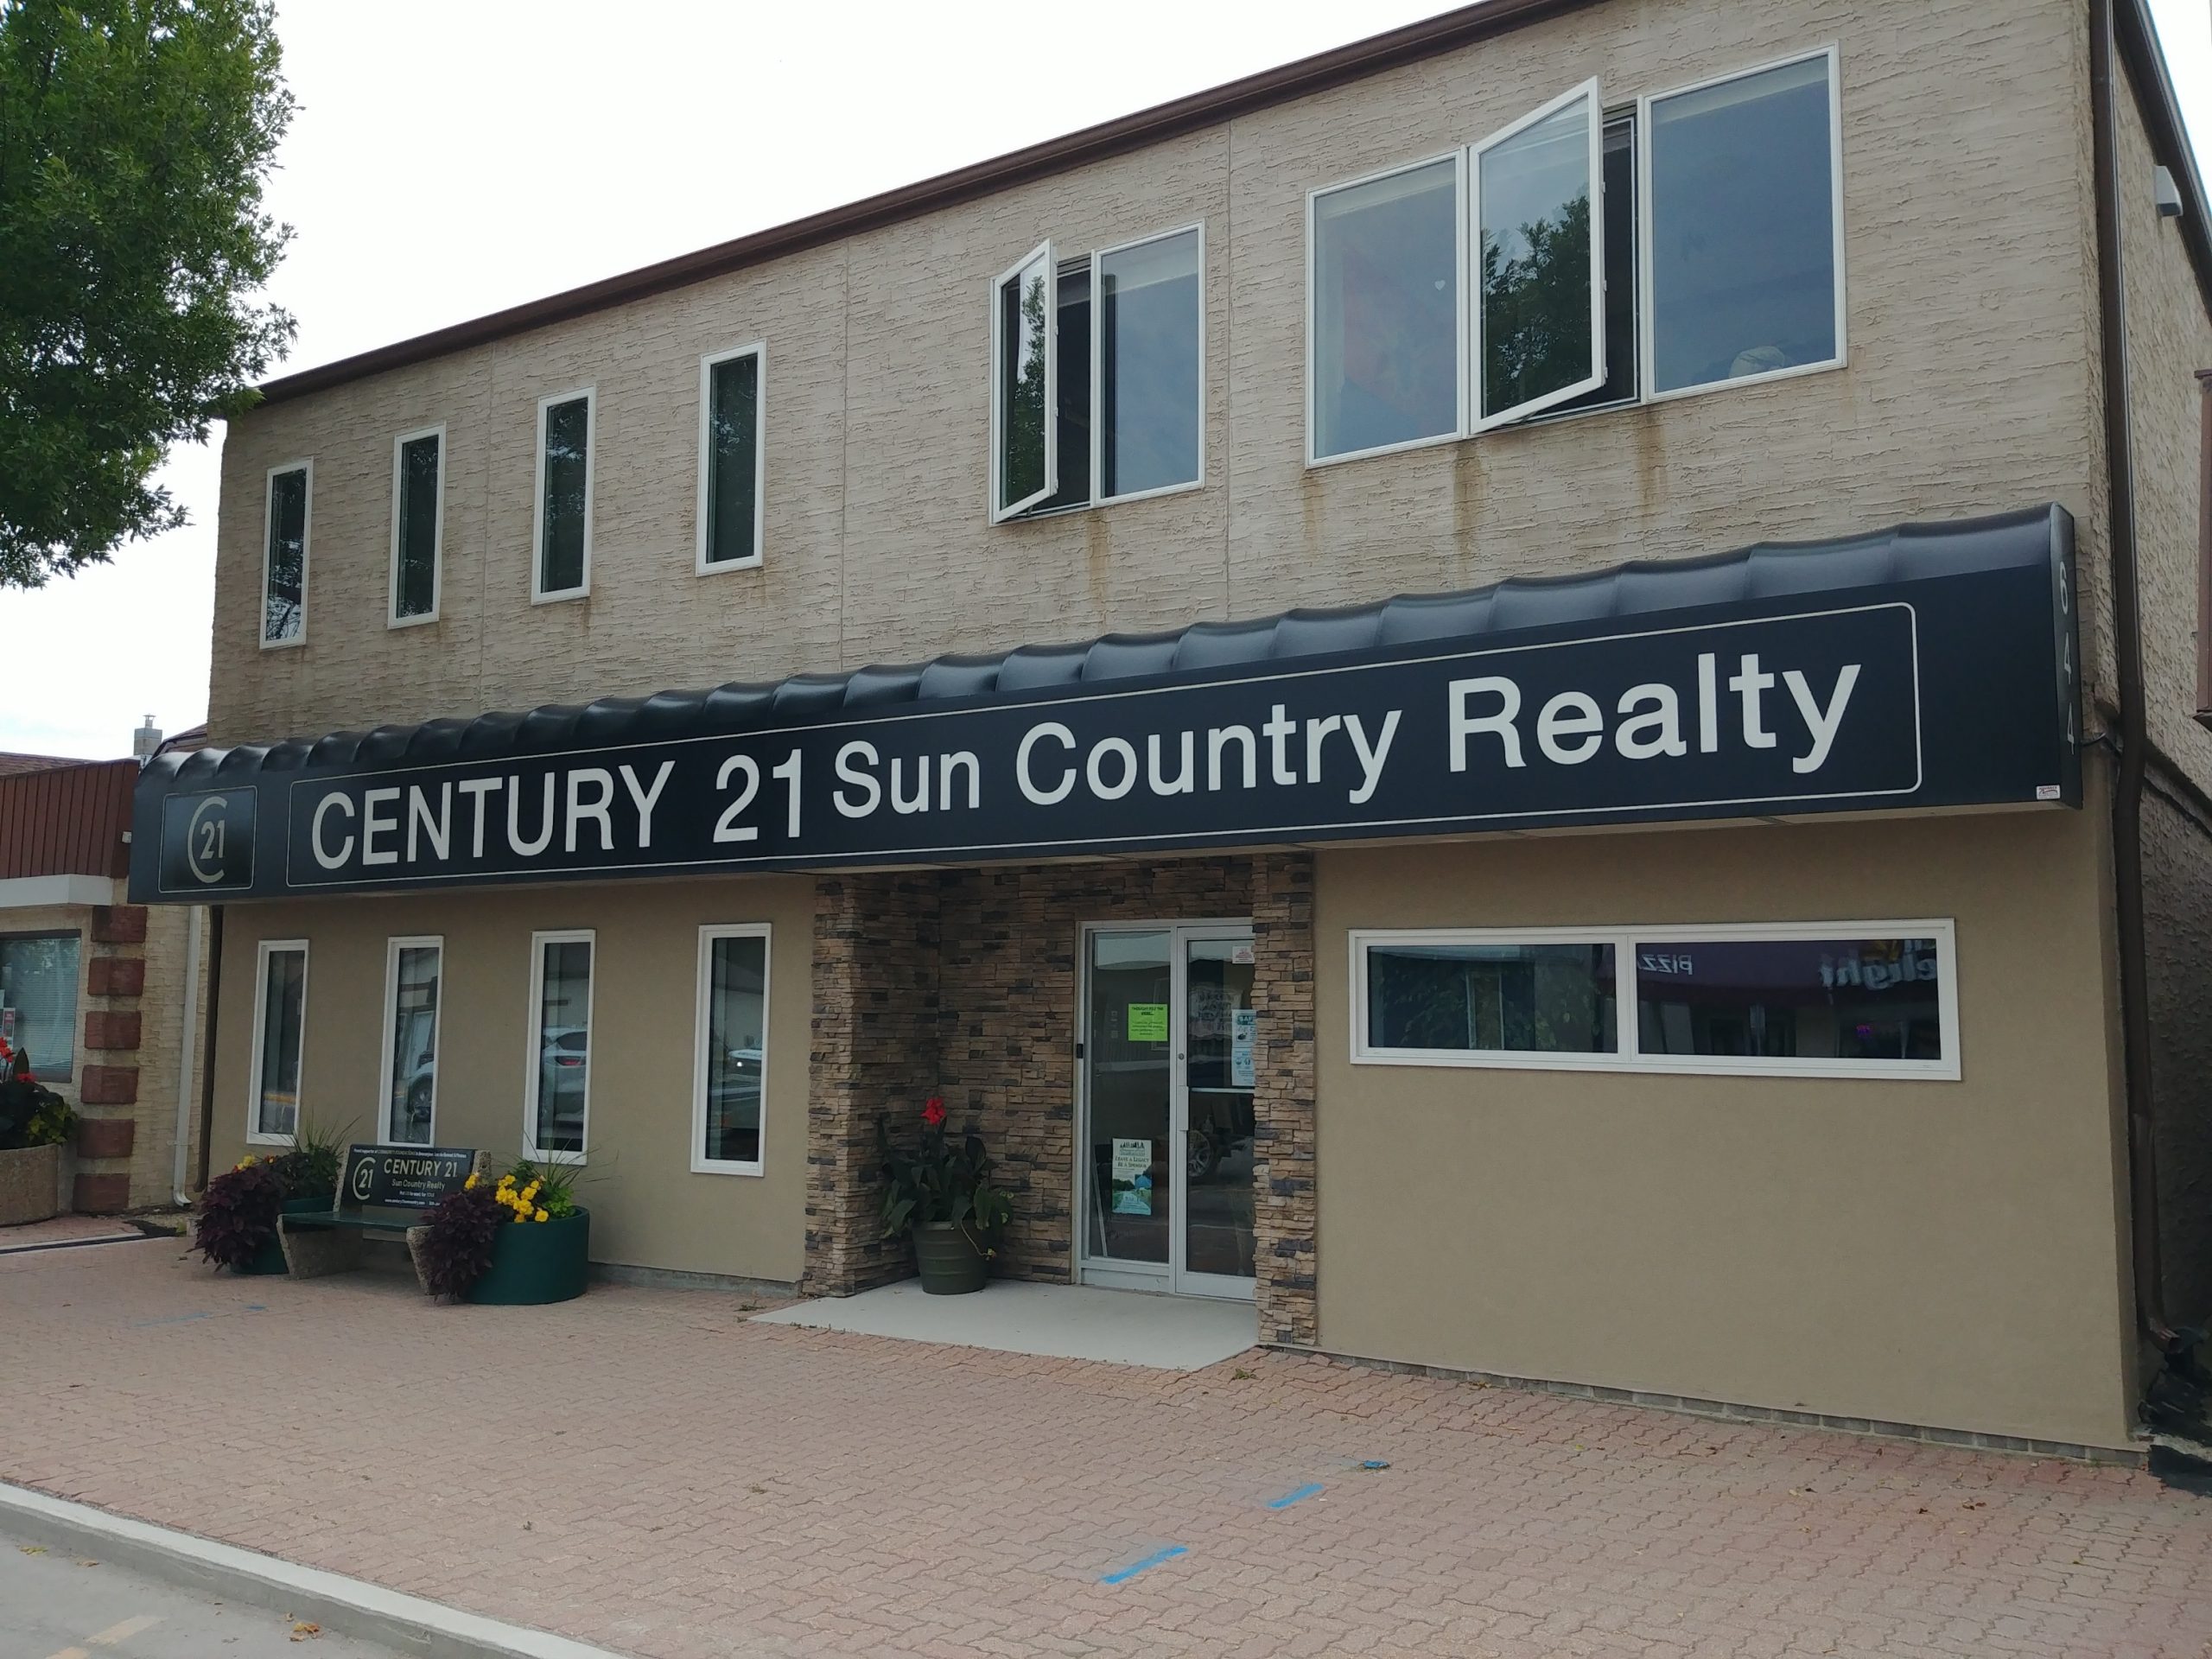 CENTURY 21 Sun Country Realty